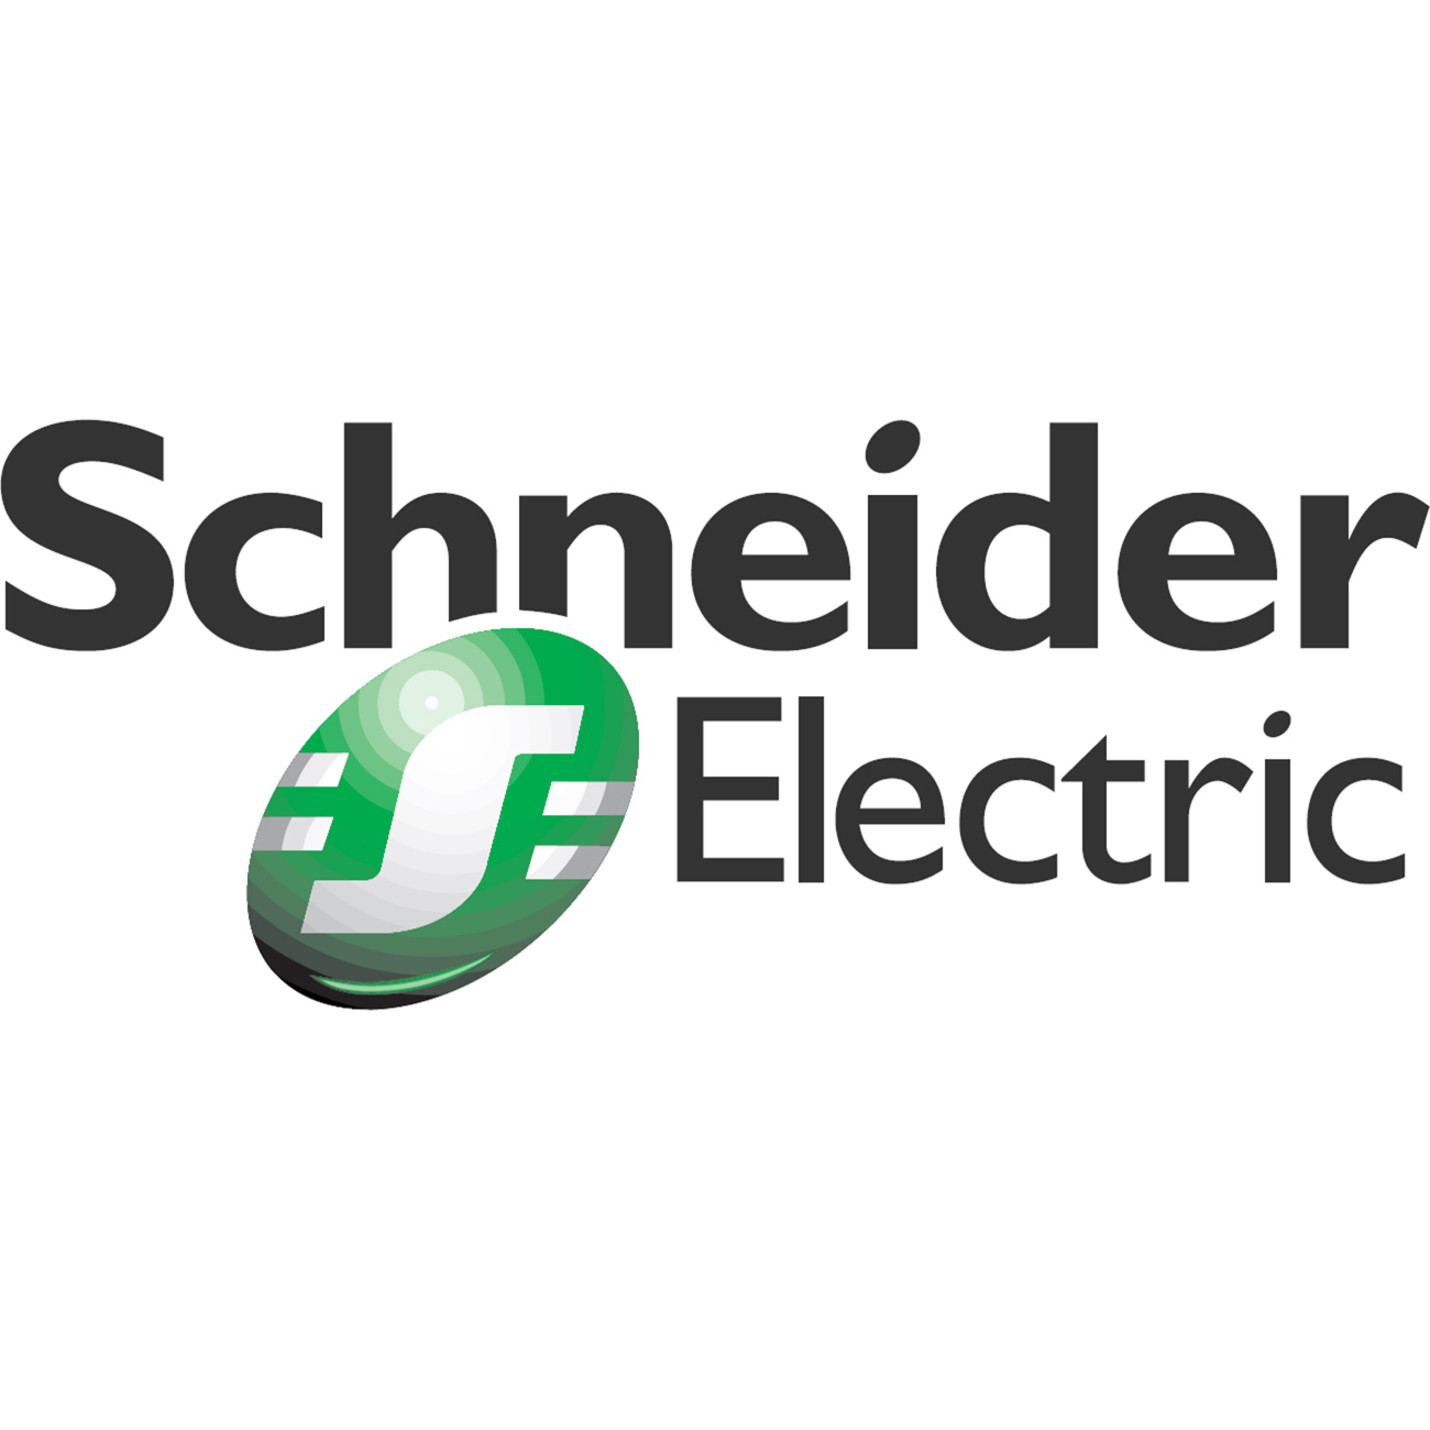 APC by Schneider Electric Change ManagerLicense500 Device AP97500